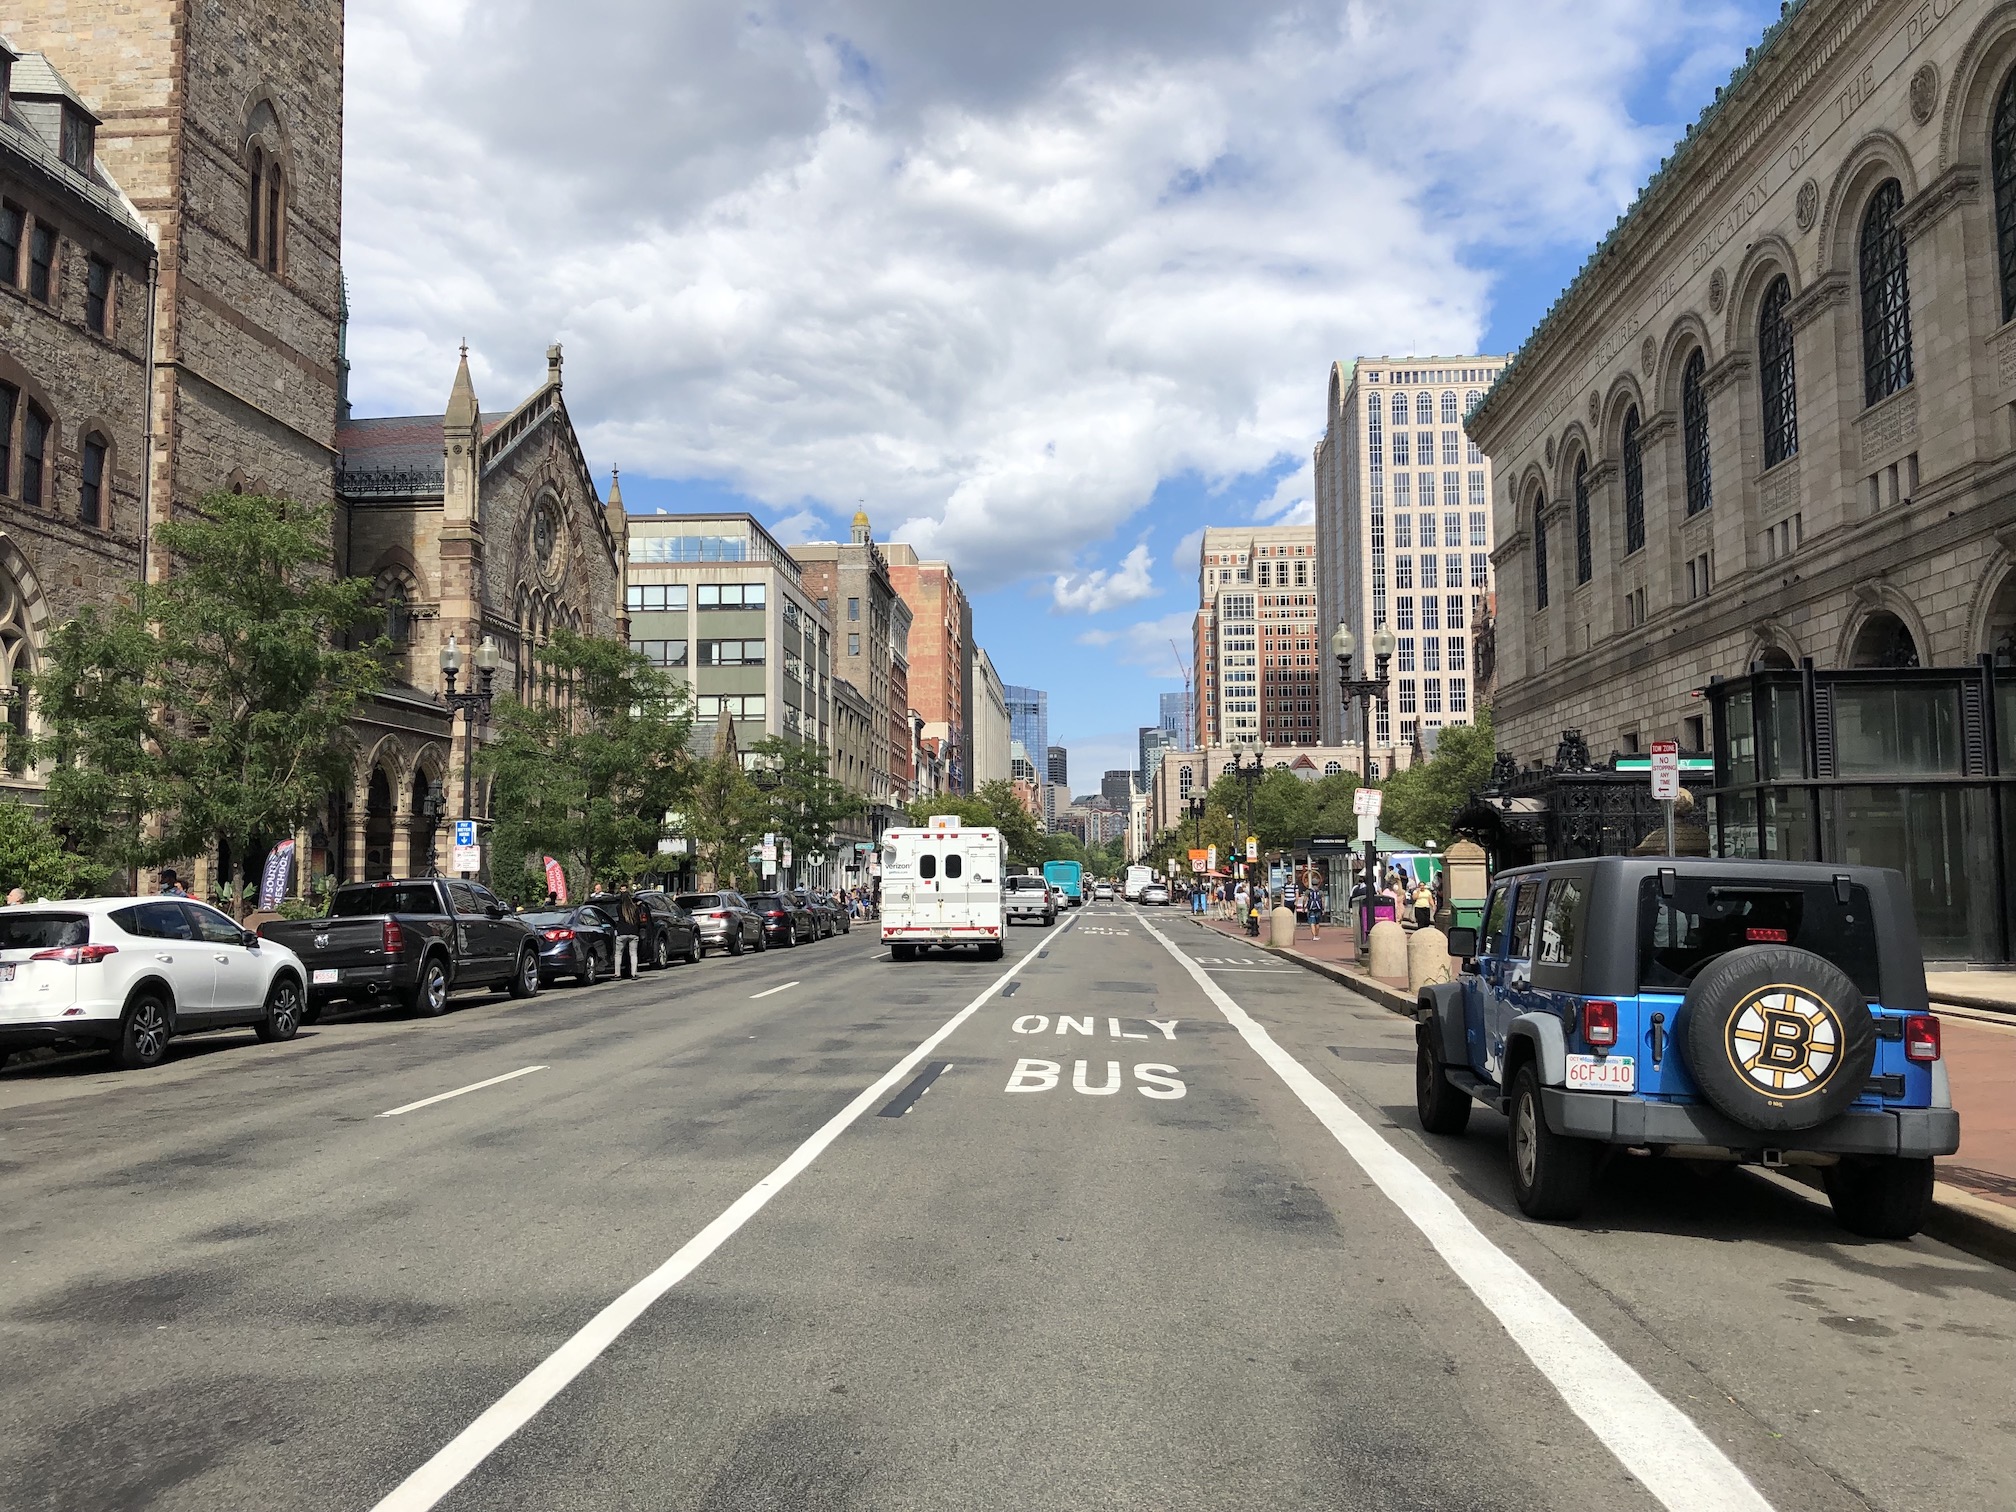 A view down an empty "bus only" lane on Boylston Street, looking towards downtown Boston, on the day before Orange Line replacement bus shuttle service takes effect.